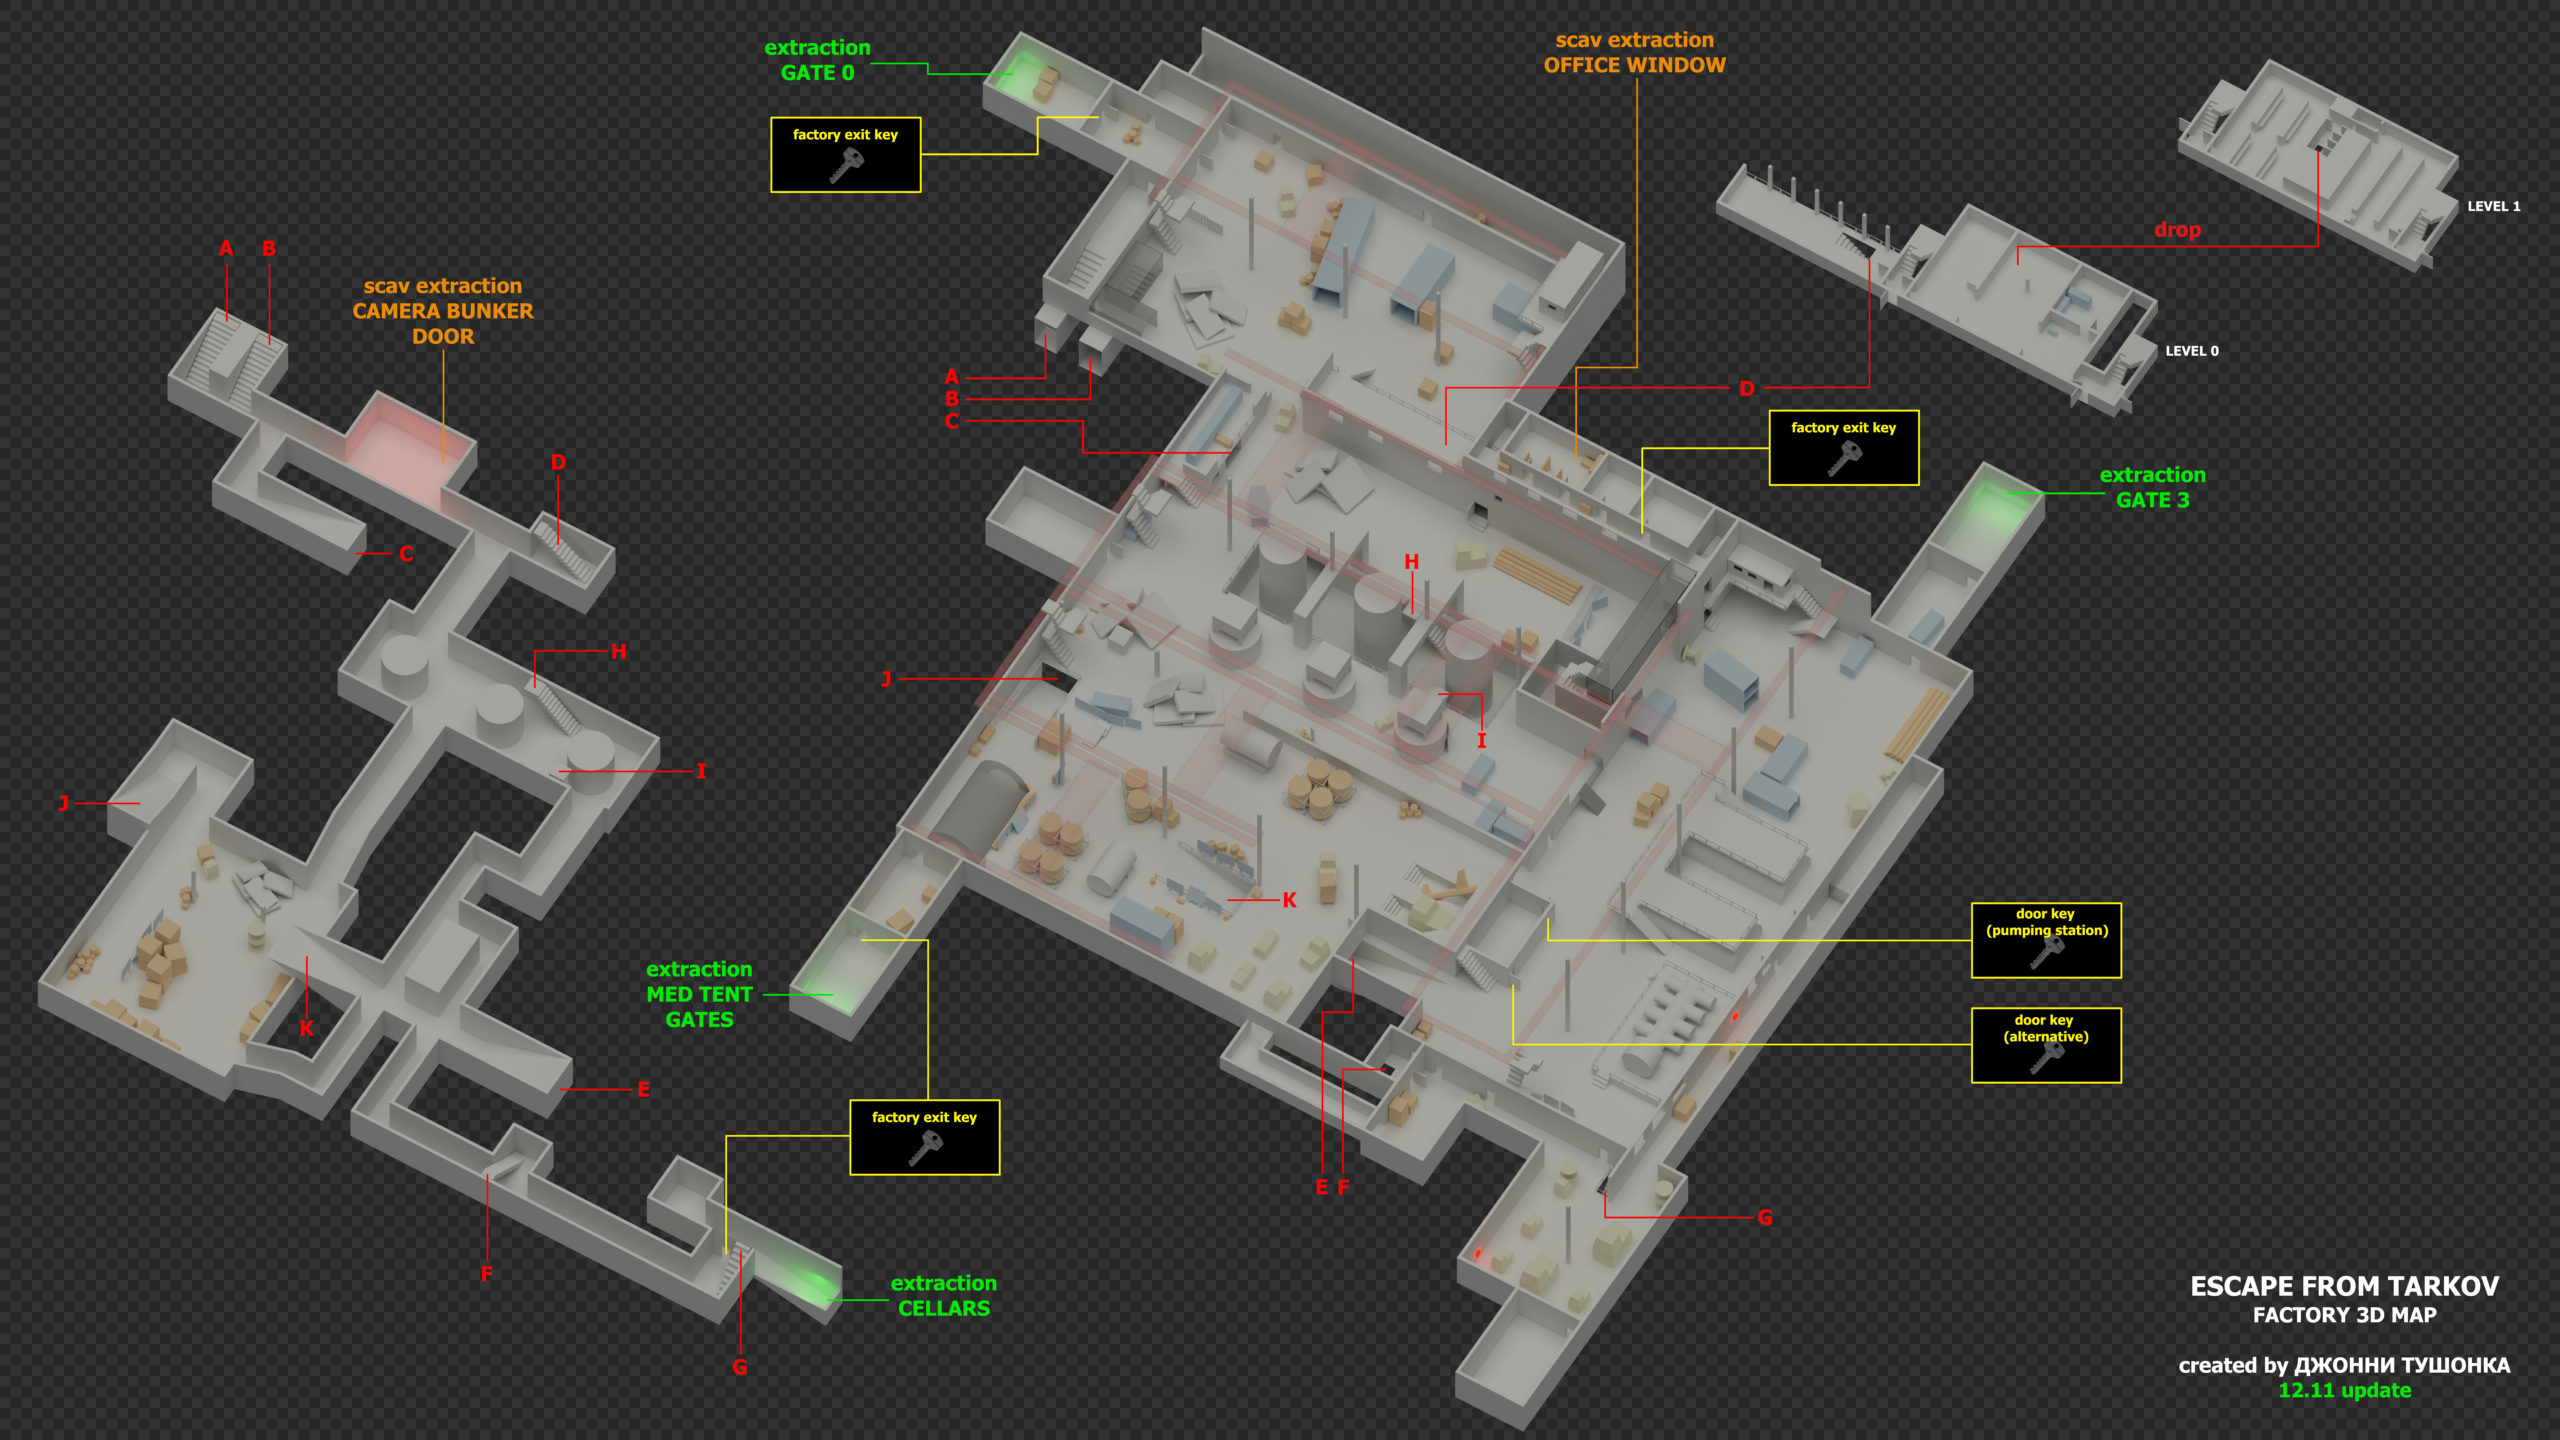 Escape From Tarkov Factory Map Scaled 